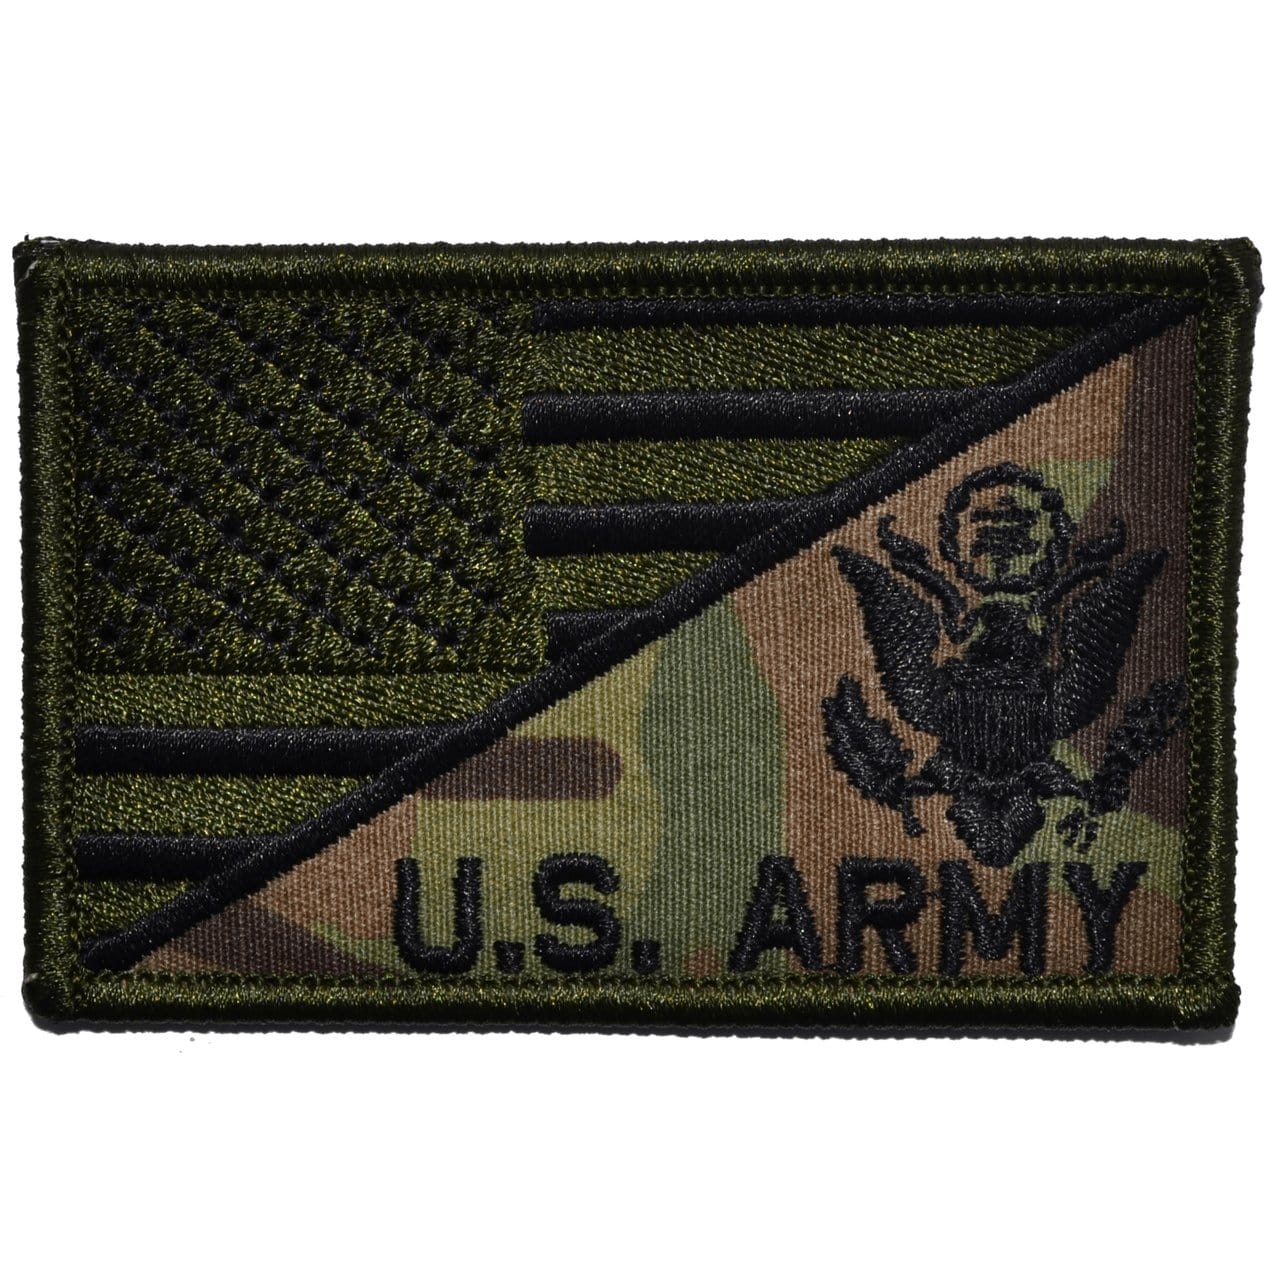 Tactical Gear Junkie Patches MultiCam US Army Crest With Text USA Flag - 2.25x3.5 Patch